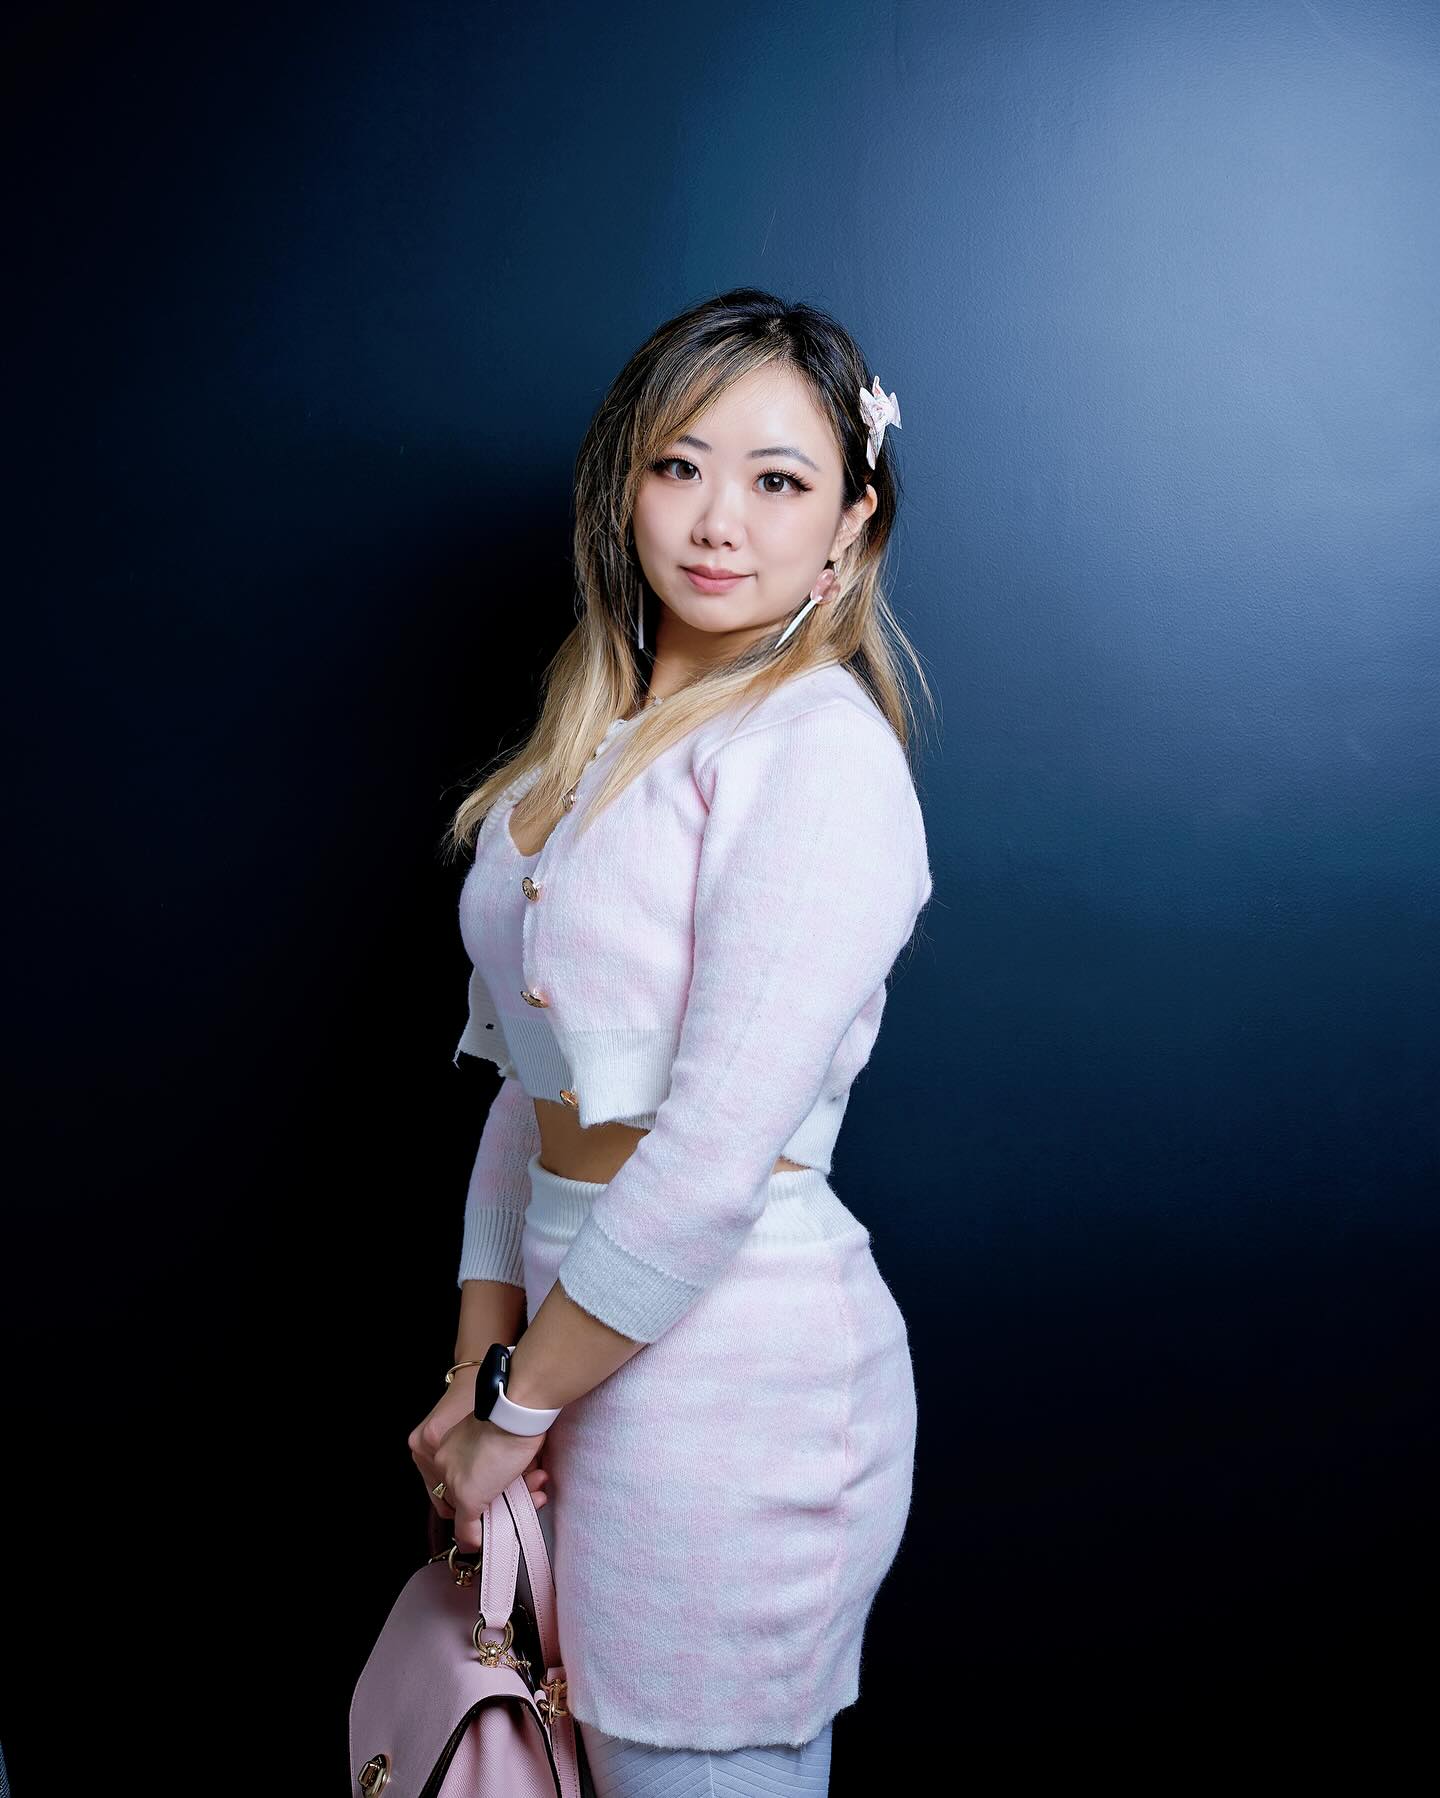 Shirt, cardigan, and skirt are all from @yesstyle 🎀🌸💕
Use my code “3PEARLS” for a discount 🛍️
➡️ Swipe to see all 10 photos! ➡️
📸: @metalhoos
__
#ysofficesiren #yesstyle #yesstyleinfluencers #couponcode #asianfashion #kpop #thinkpink #kawaii #nycmodel #asianmodelgirls #officesiren #pinkfashion #pastelaesthetic @yesstyleinfluencers